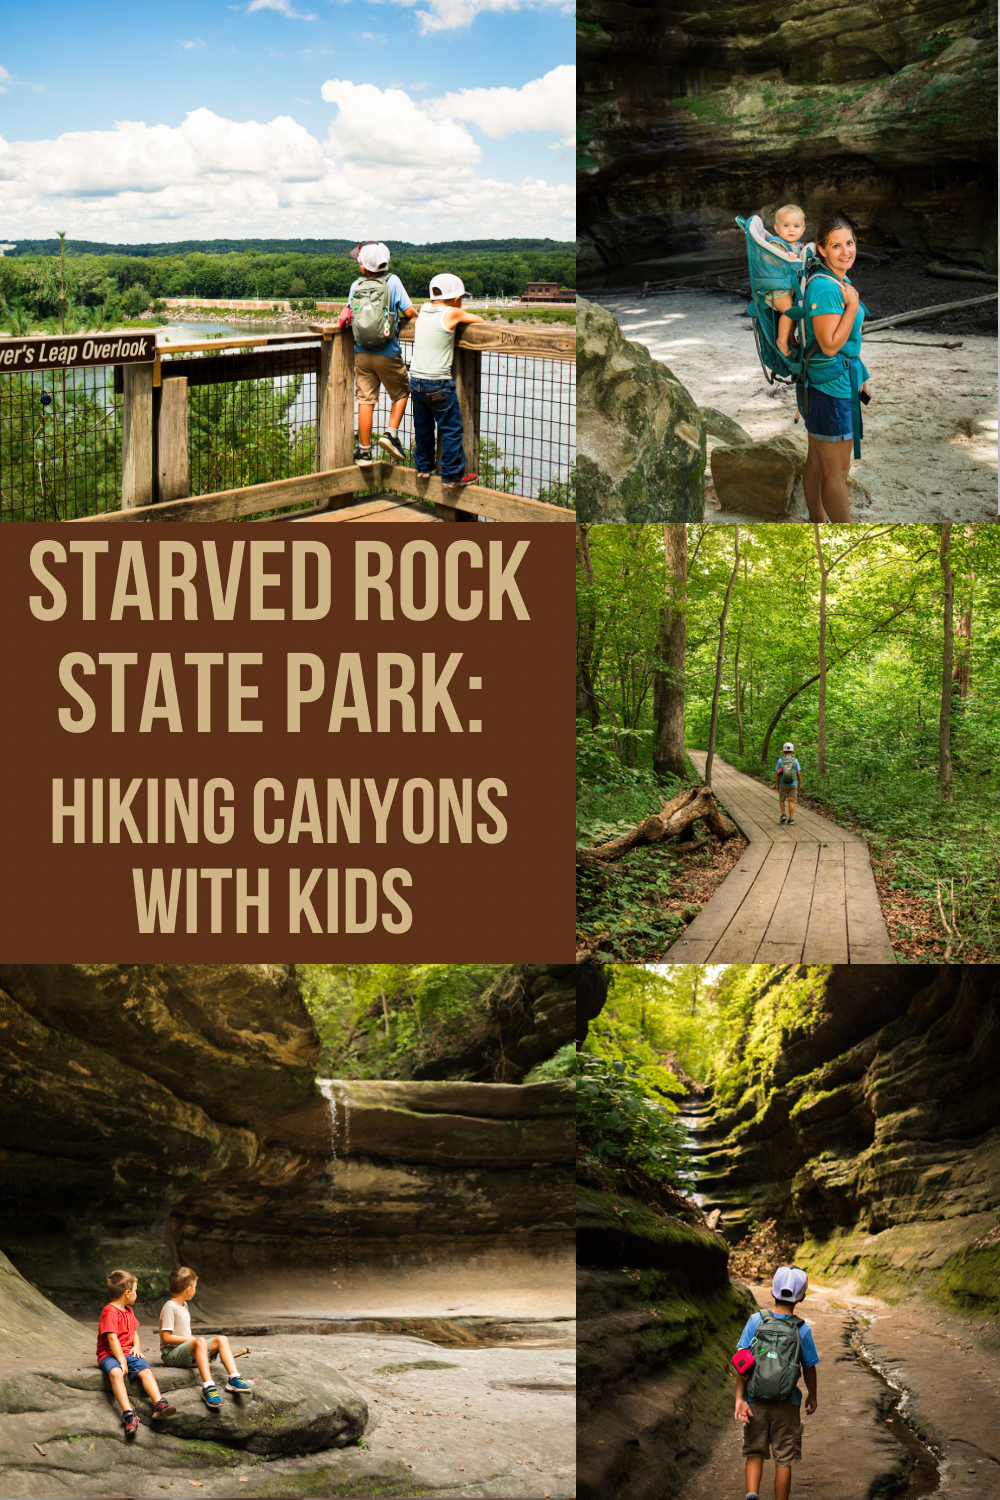 Starved Rock State Park: Hiking Canyons with Kids